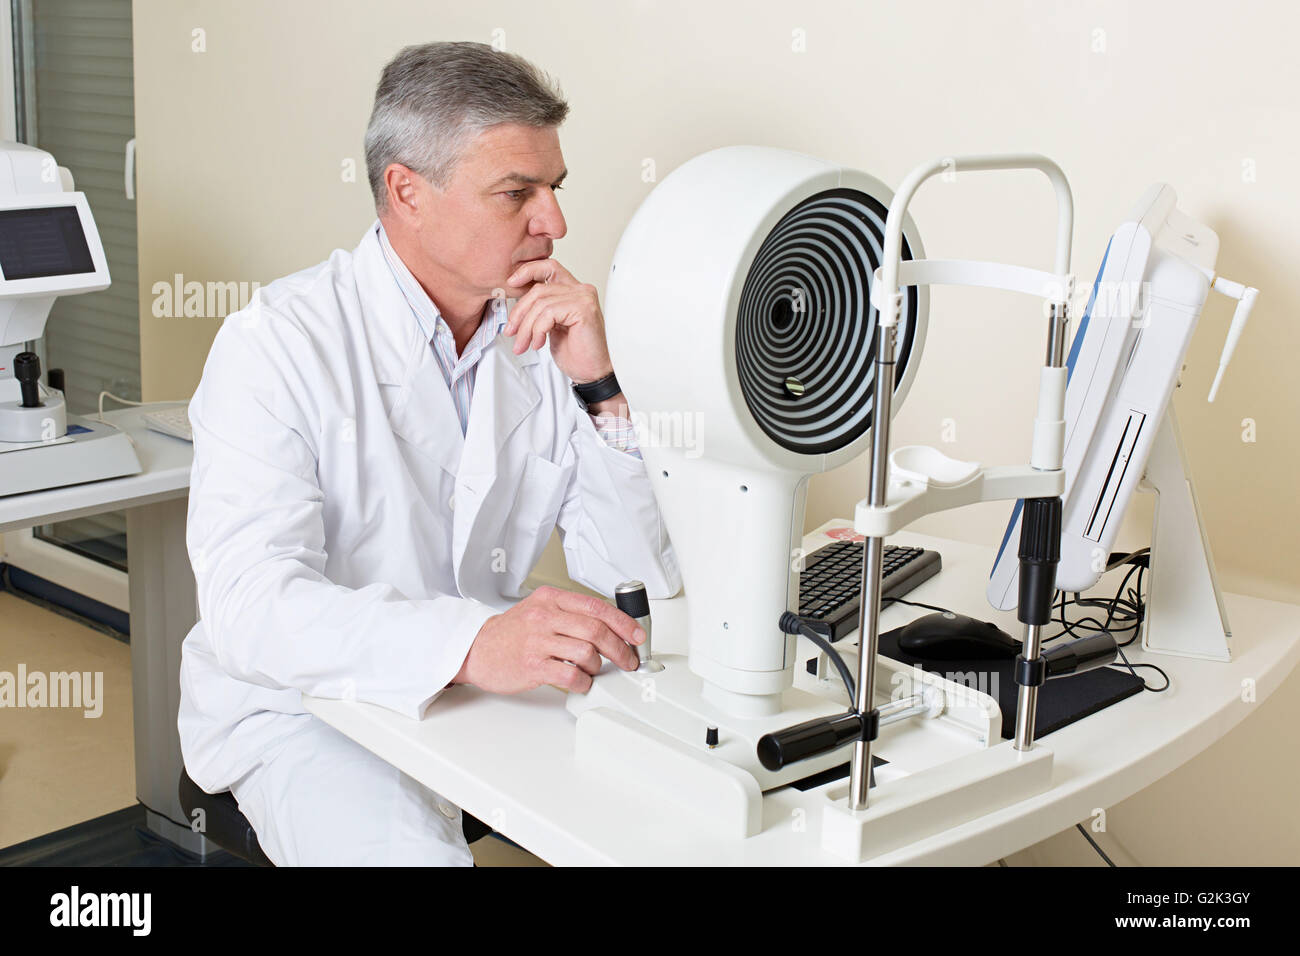 ophthalmologist sitting near the equipment Stock Photo